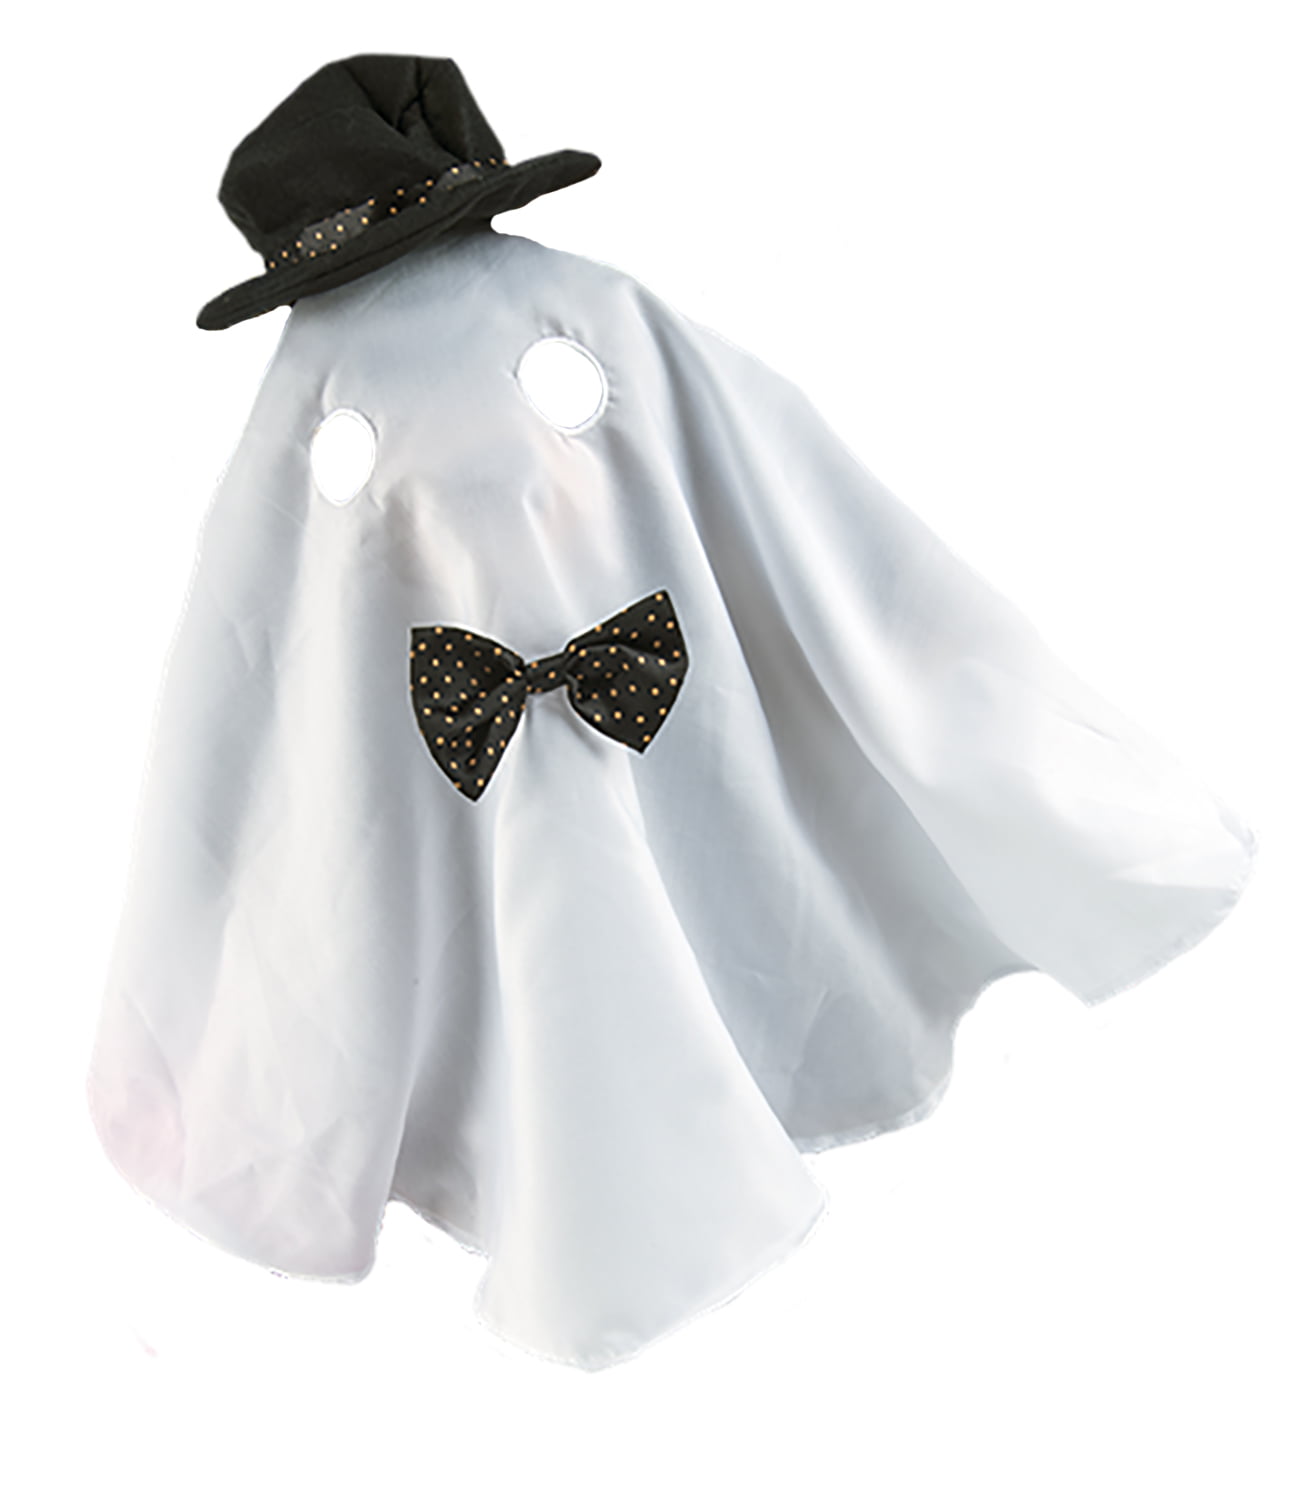 Ghost Costume Fits Most 14/" 18/" Build-a-bear and Make Your Own Stuffed Animals